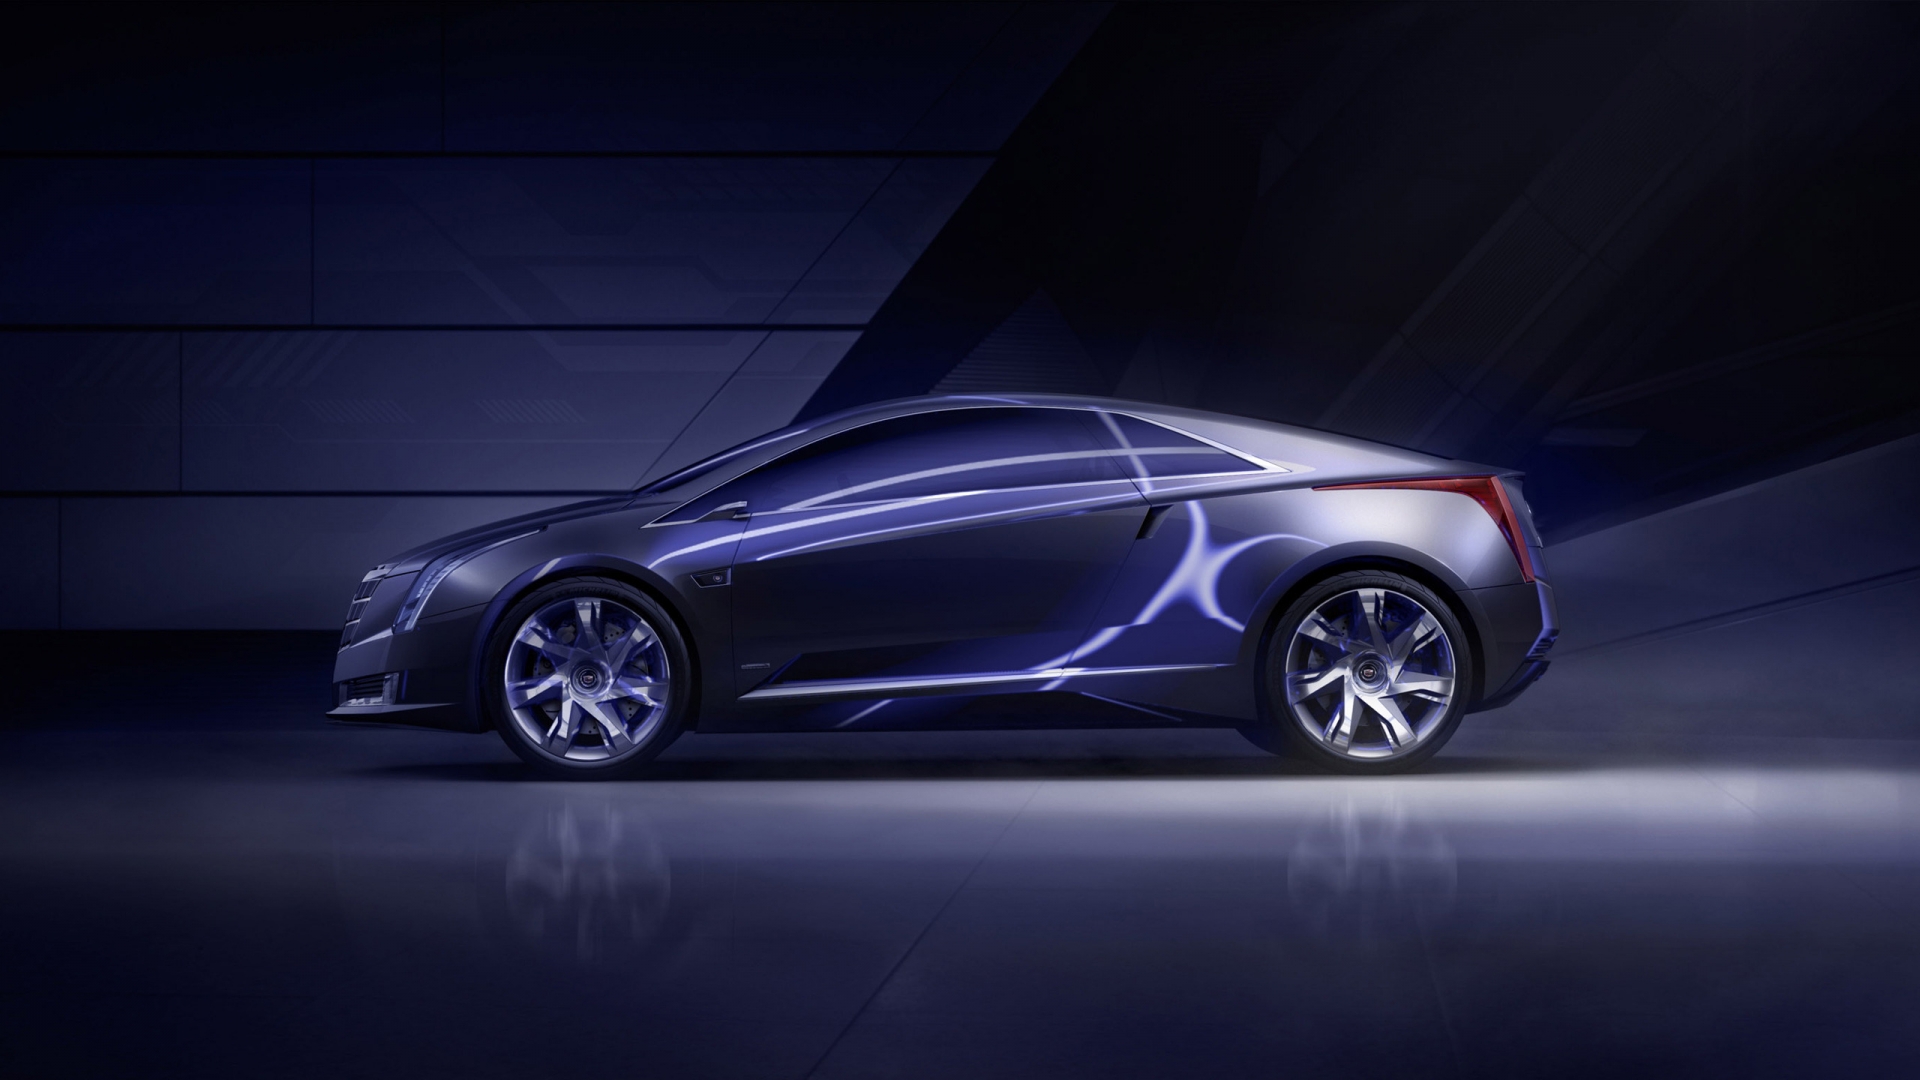 Cadillac Converj Concept Side for 1920 x 1080 HDTV 1080p resolution